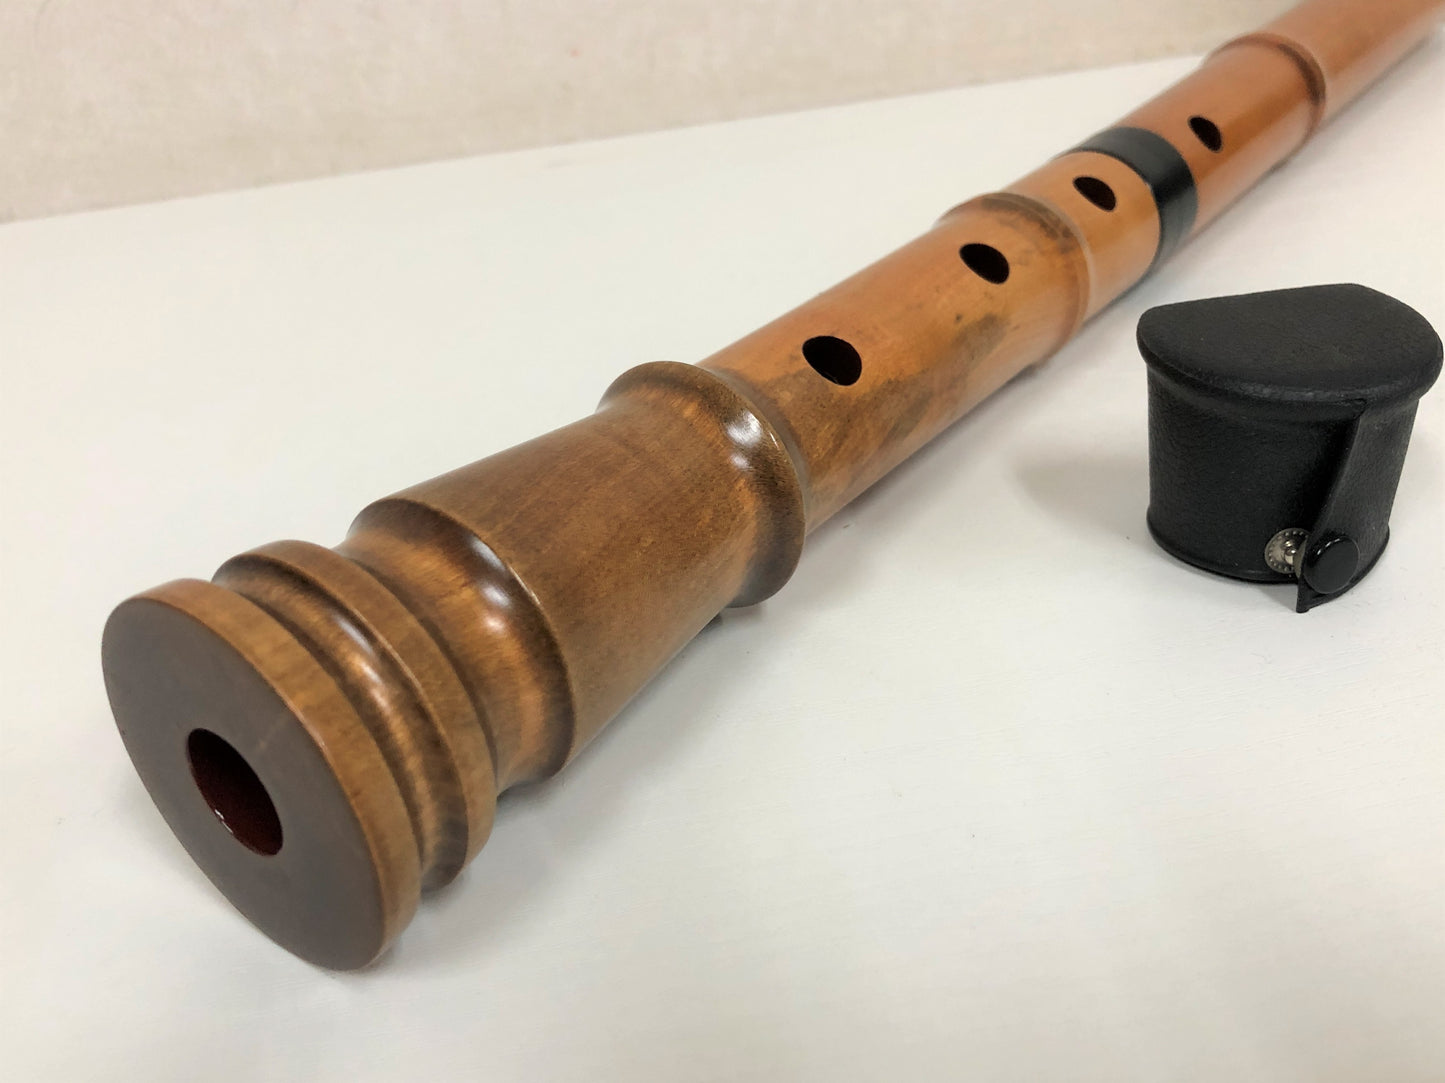 Y3904 SHAKUHACHI wooden Flute Tozan style Japanese Traditional antique music